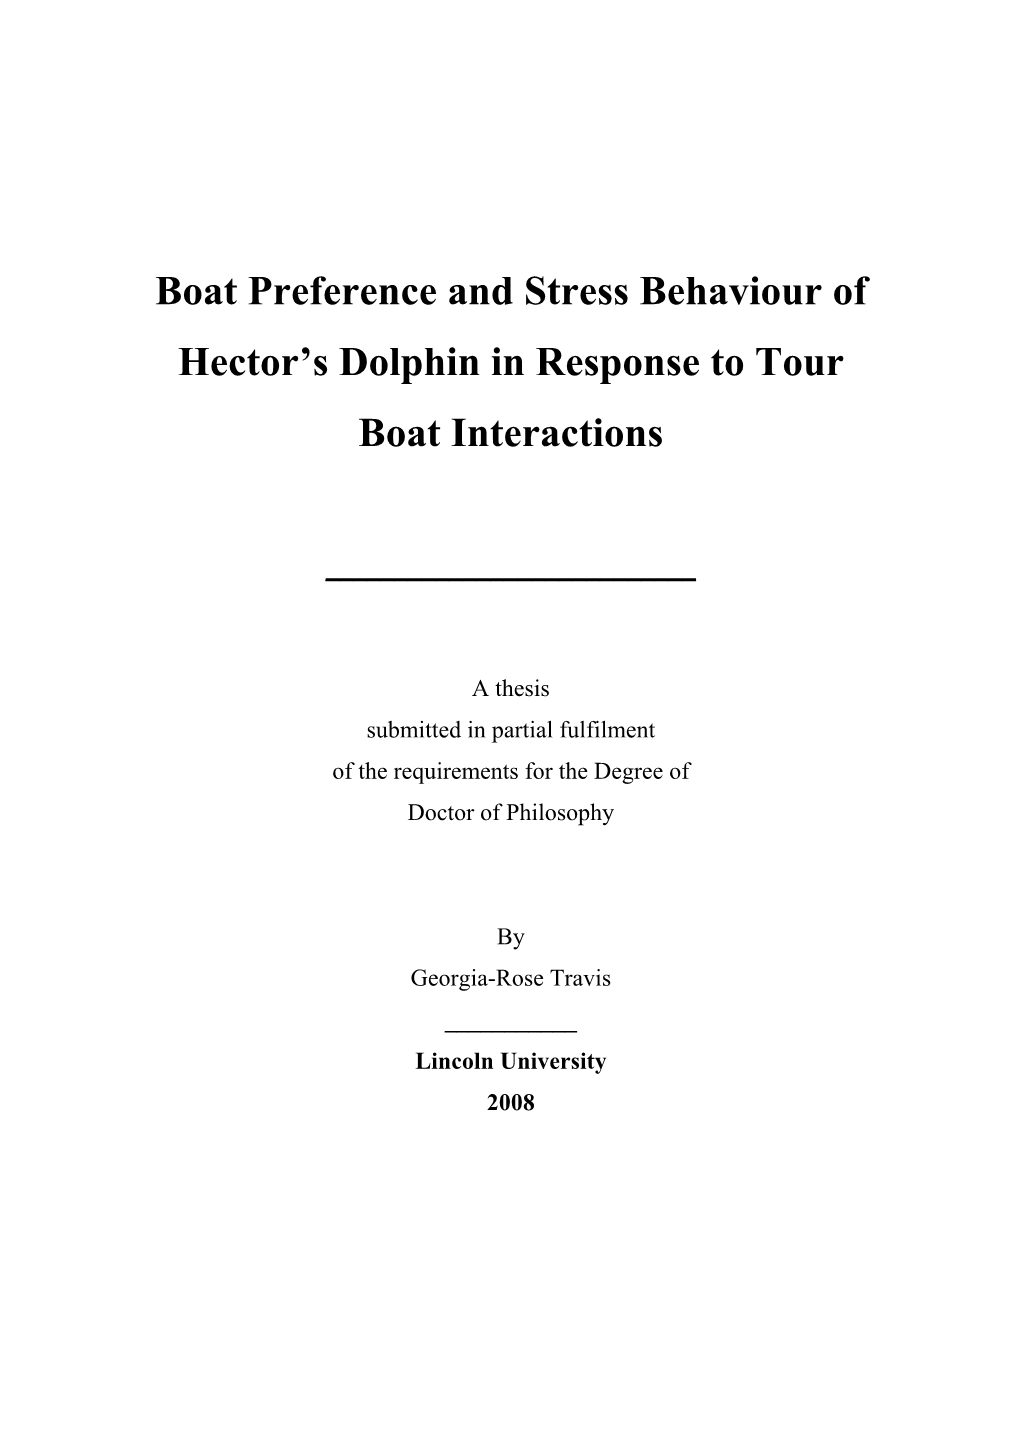 Boat Preference and Stress Behaviour of Hector's Dolphin in Response to Tour Boat Interactions